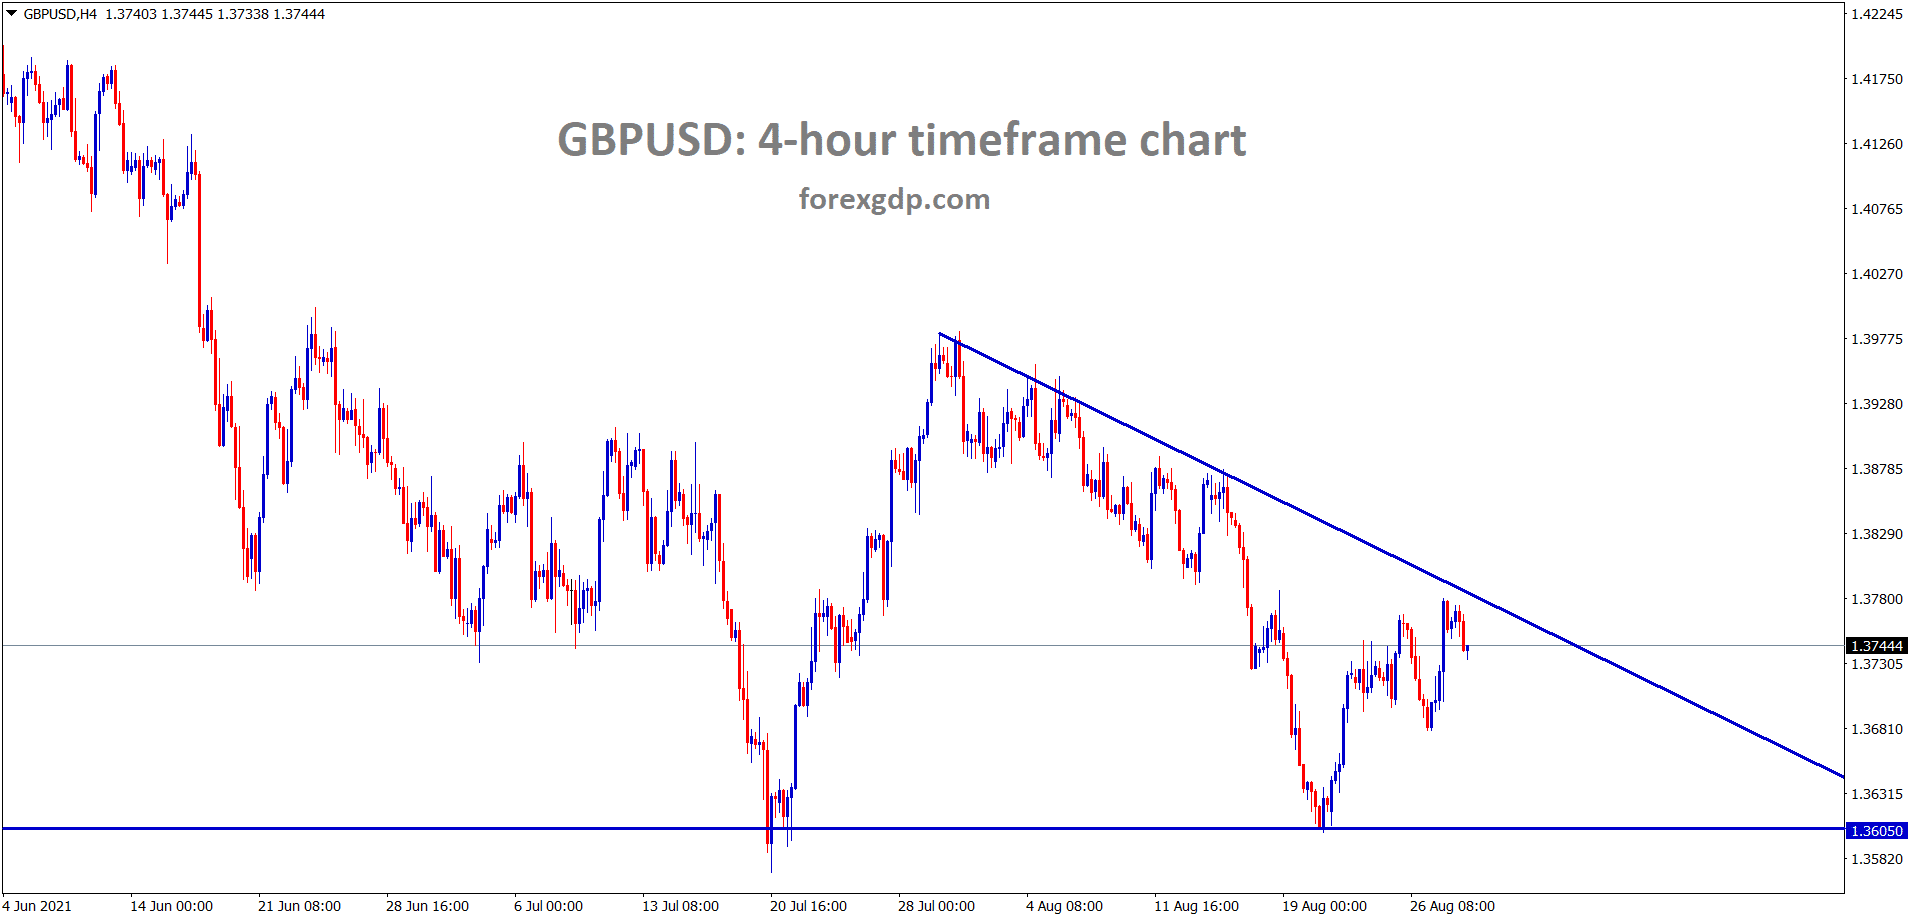 GBPUSD is moving between the descending channel range in the H4 chart wait for the breakout from this triangle pattern